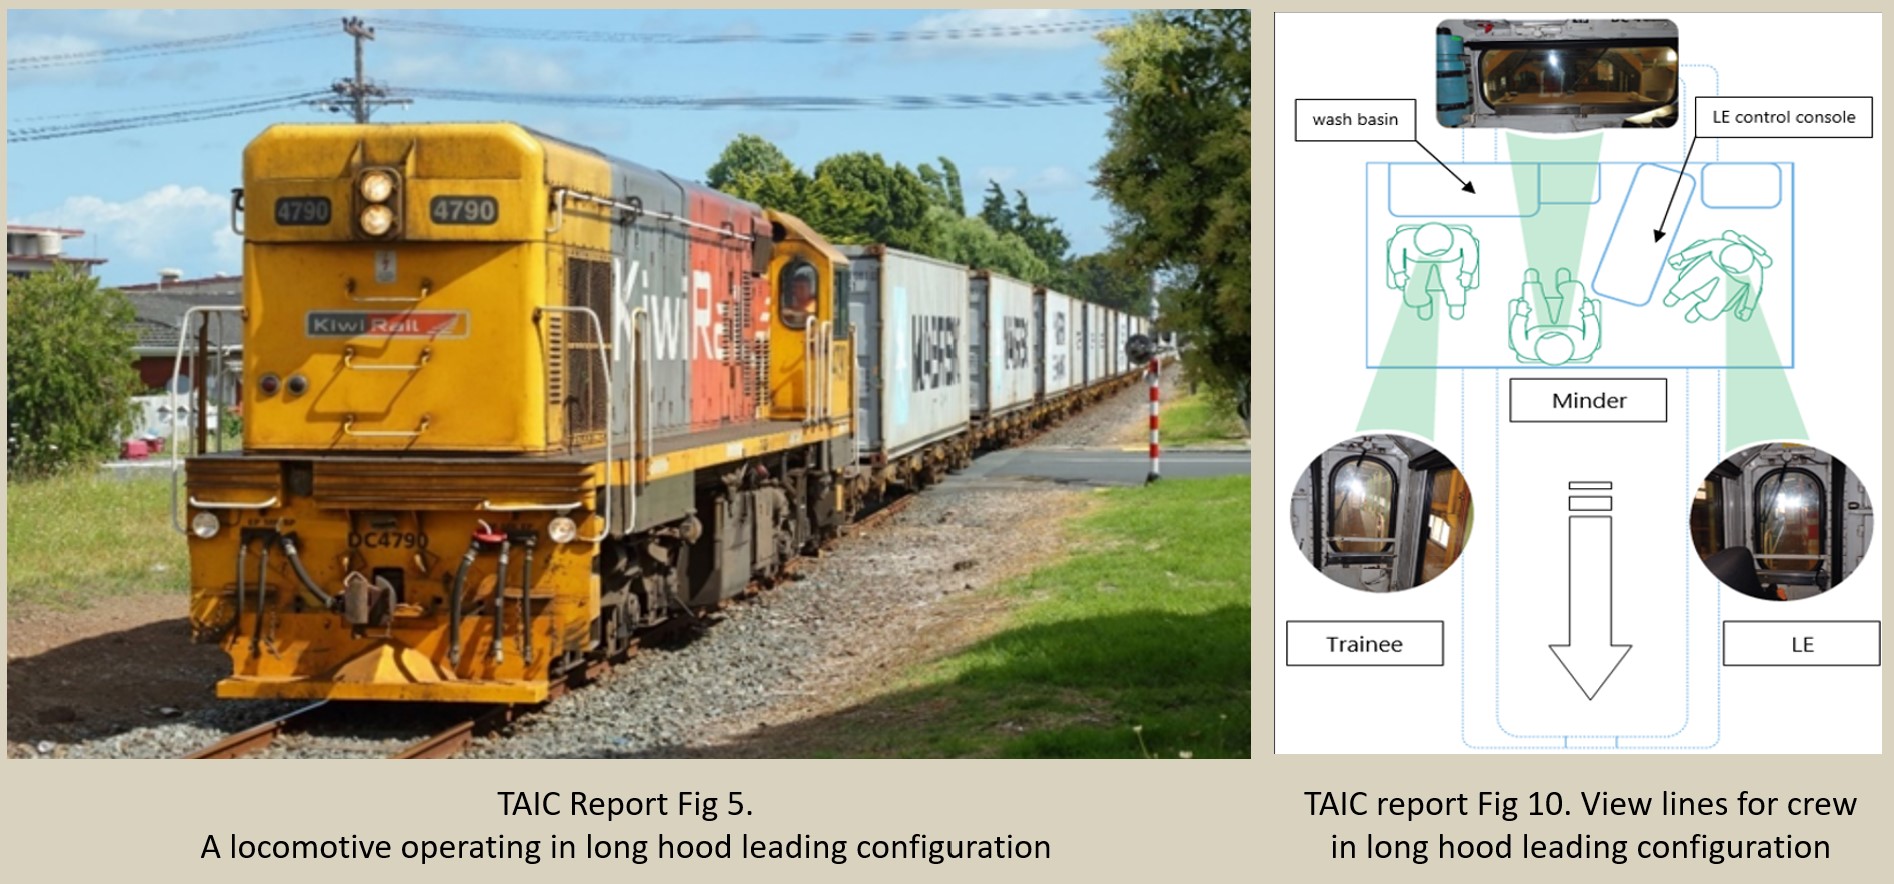 Composite image showing a photo of a locomotive in long hood leading configuration, and a line drawing plan of a typical crew cab for such configuration. Diagram shows crew sightlines. 